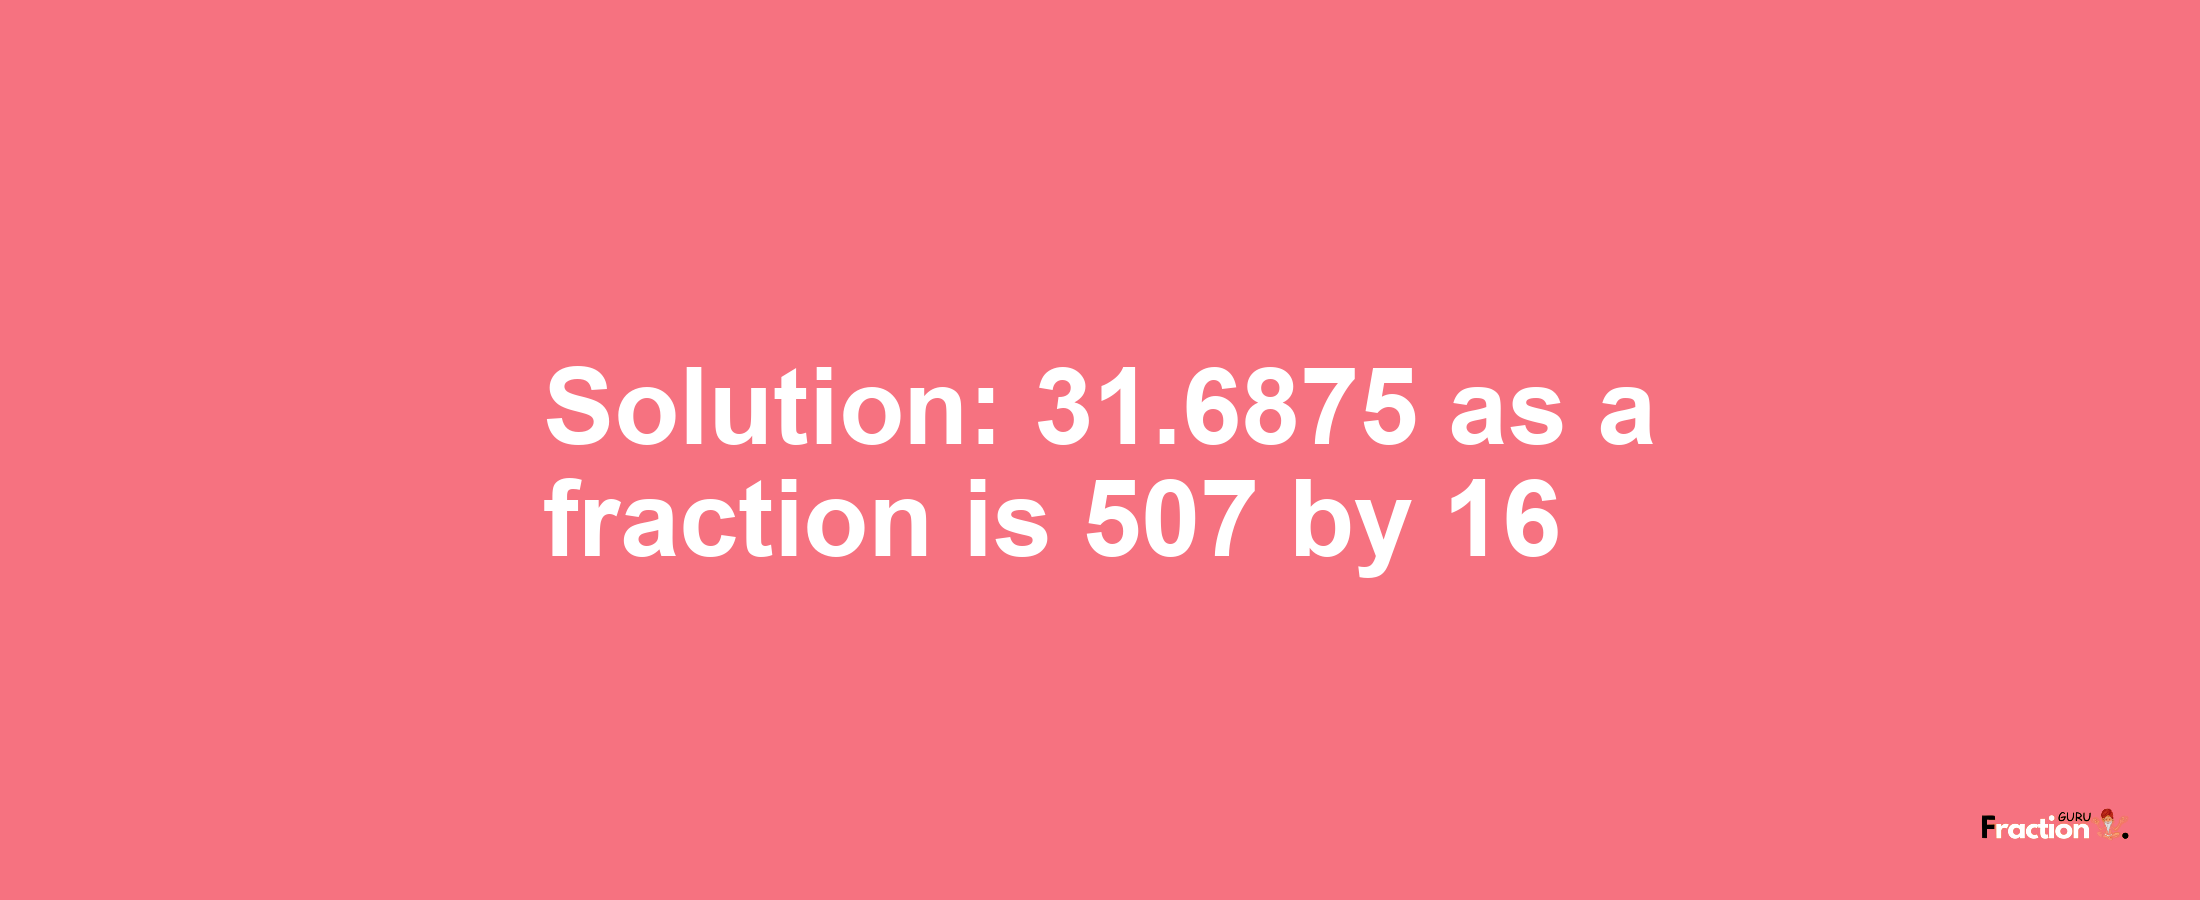 Solution:31.6875 as a fraction is 507/16